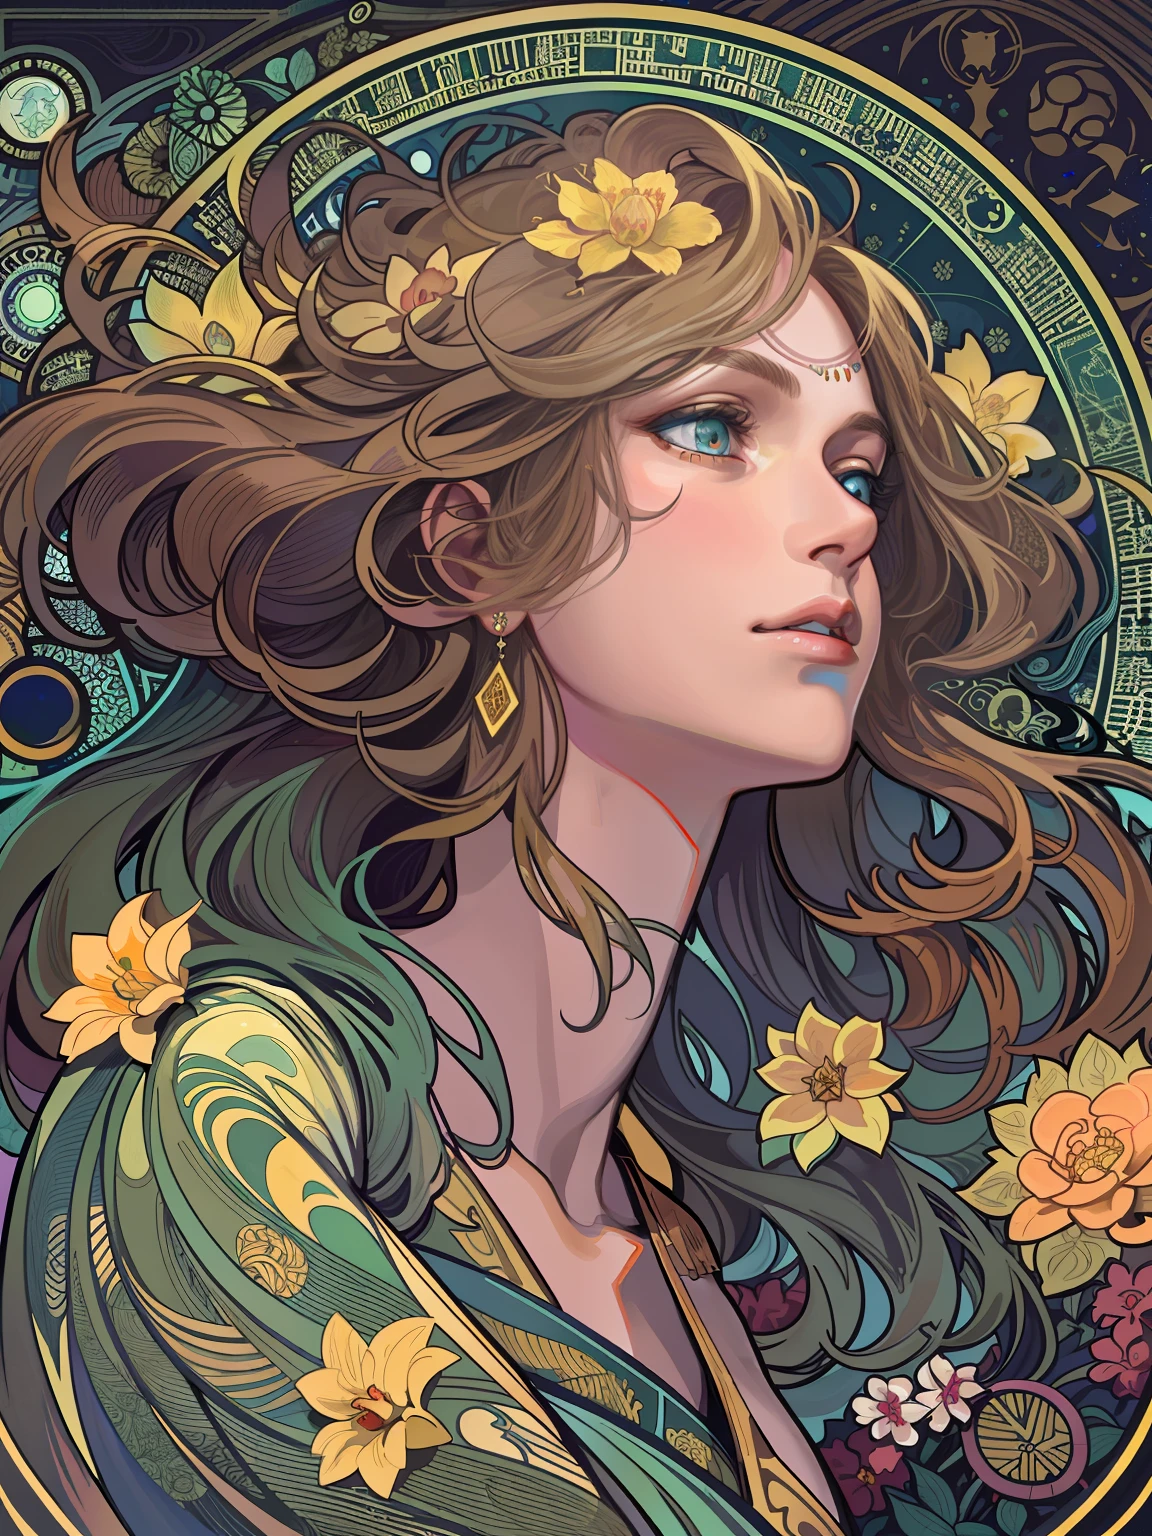 1 girl，woman，Looking down，Solo，The upper part of the body，Green eyes，european woman face portrait，with long coiled hair，Shiny skin, Detailed face, The magic robe is patterned， Sumeru，Clouds， themoon，tarot card layout，Best quality, Masterpiece, (Realistic:0.6), Realistic lighting,Flower frame， Decorative panels， abstract artistic， Alphonse Mucha （tmasterpiece， best qualtiy， A high resolution： 1.4）， A detailed， Complicated details， 4K，cerulean， Line art， Fibonacci